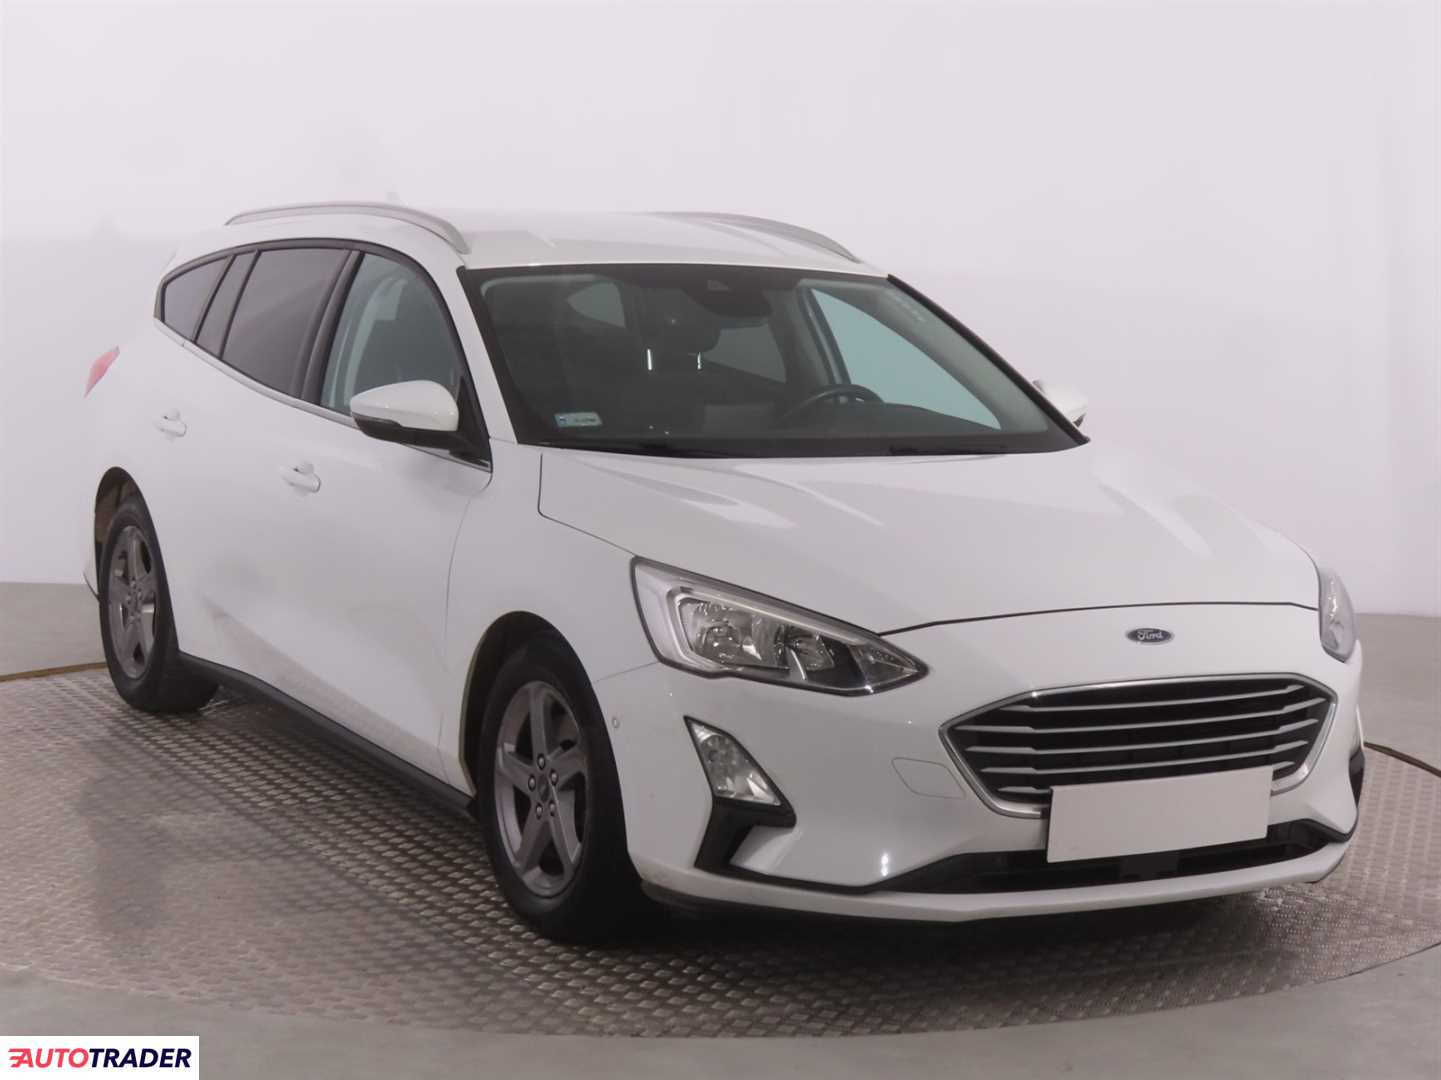 Ford Focus 2018 2.0 147 KM